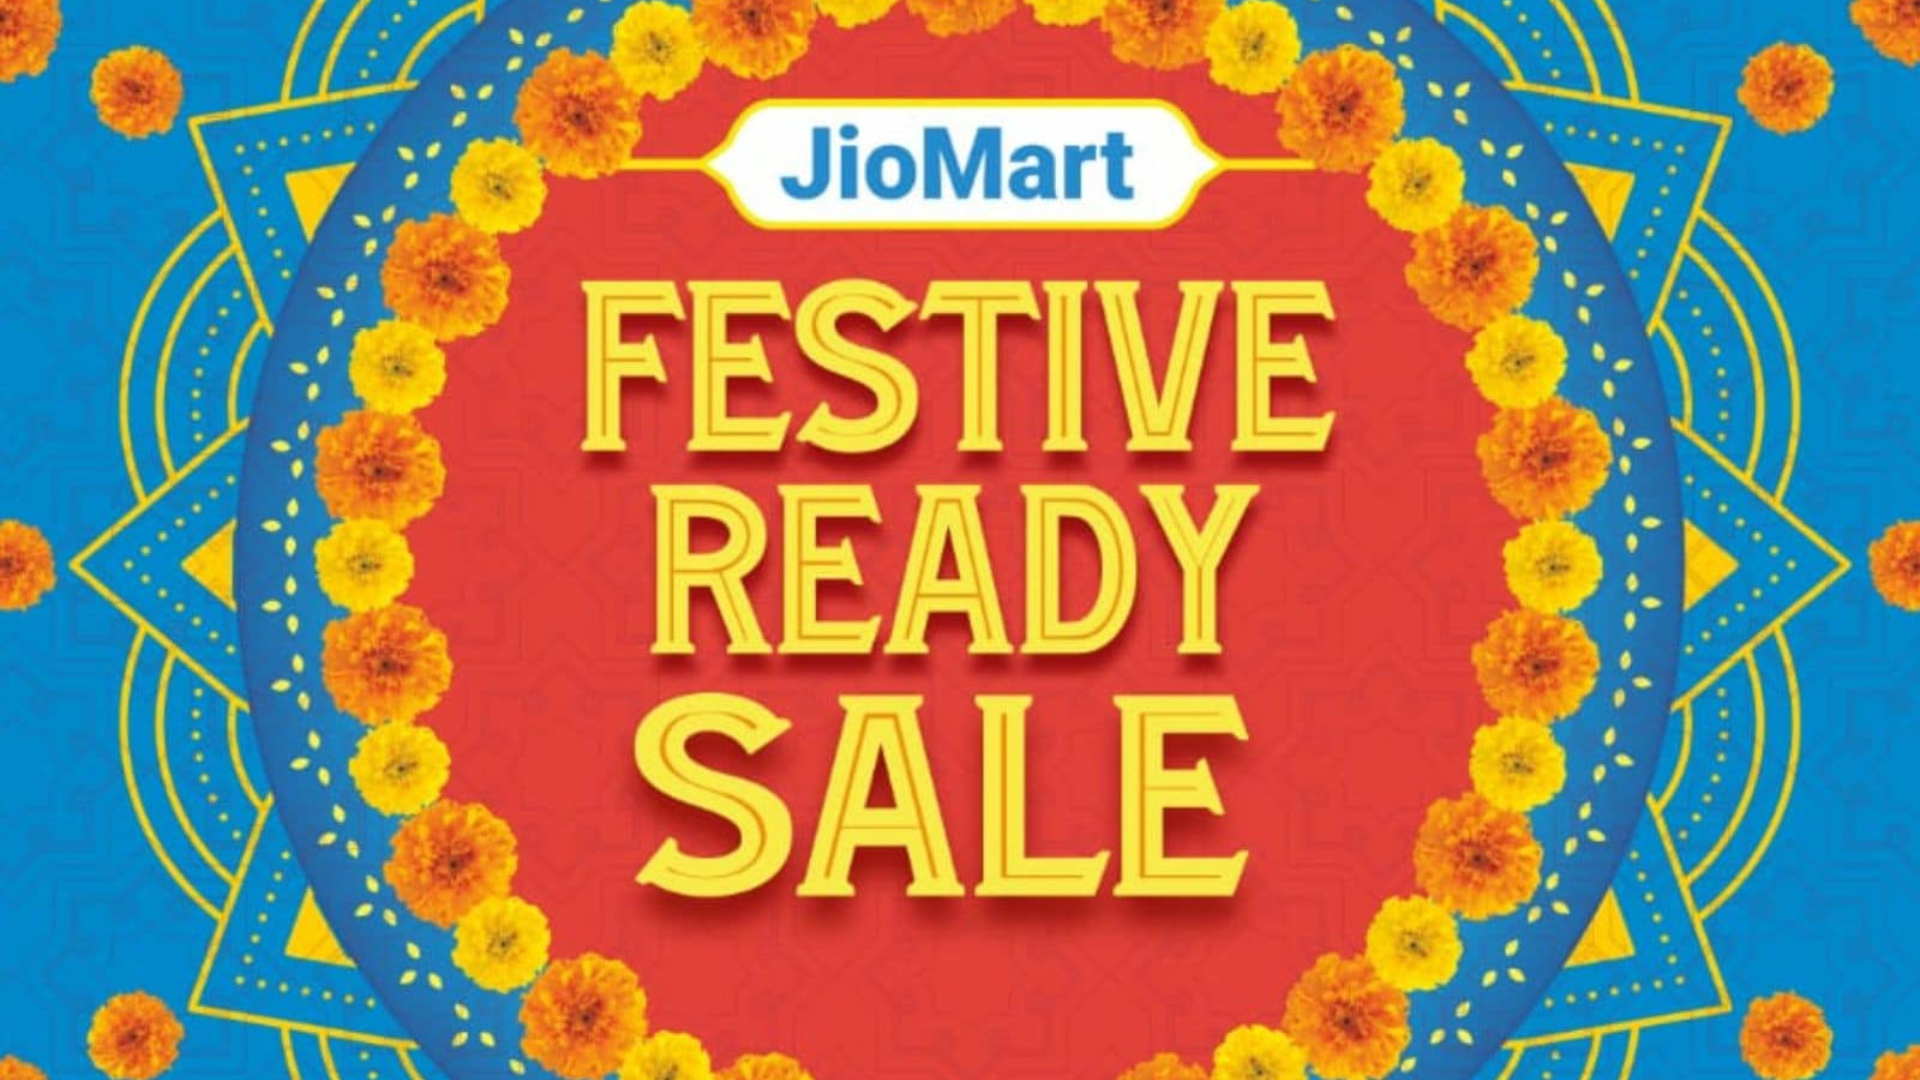 JioMart Festival Sale: Grocery, Personal Care, Fashion, And More 